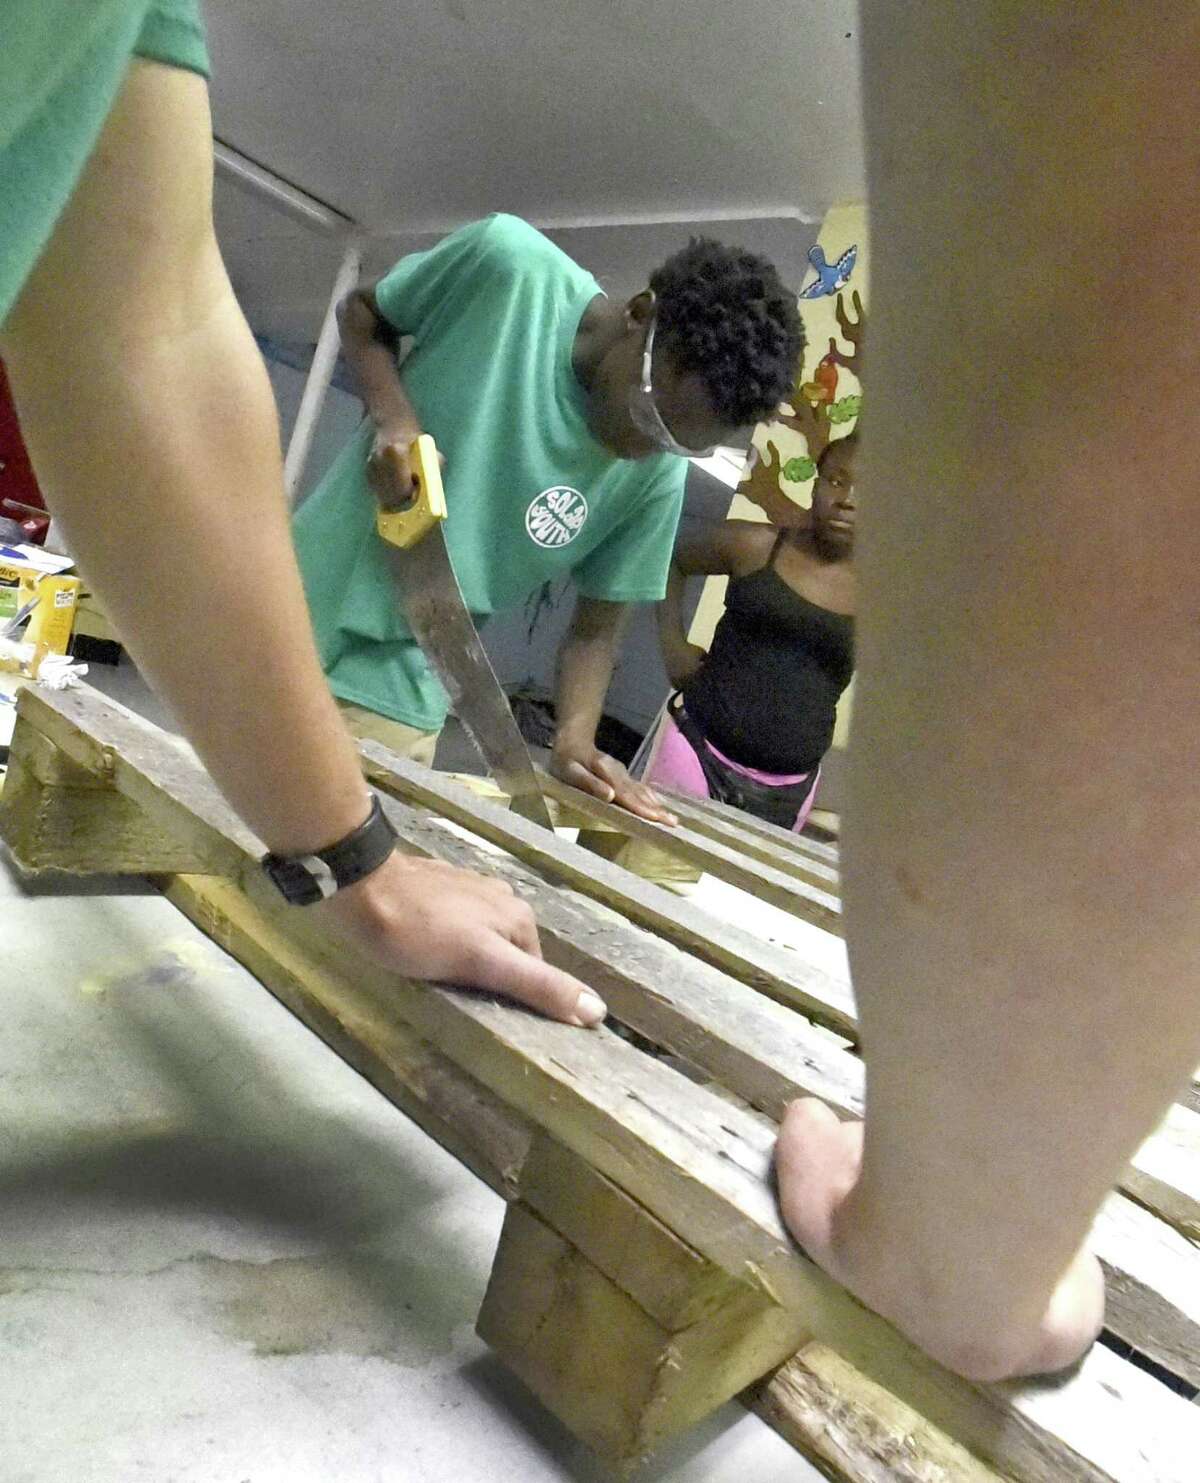 Zarquis Sanders of New Haven, 17, helps prepare a recycled wood pallet that will be turned into a bench for an outside community space as part of the Solar Youth Green Jobs program in New Haven.